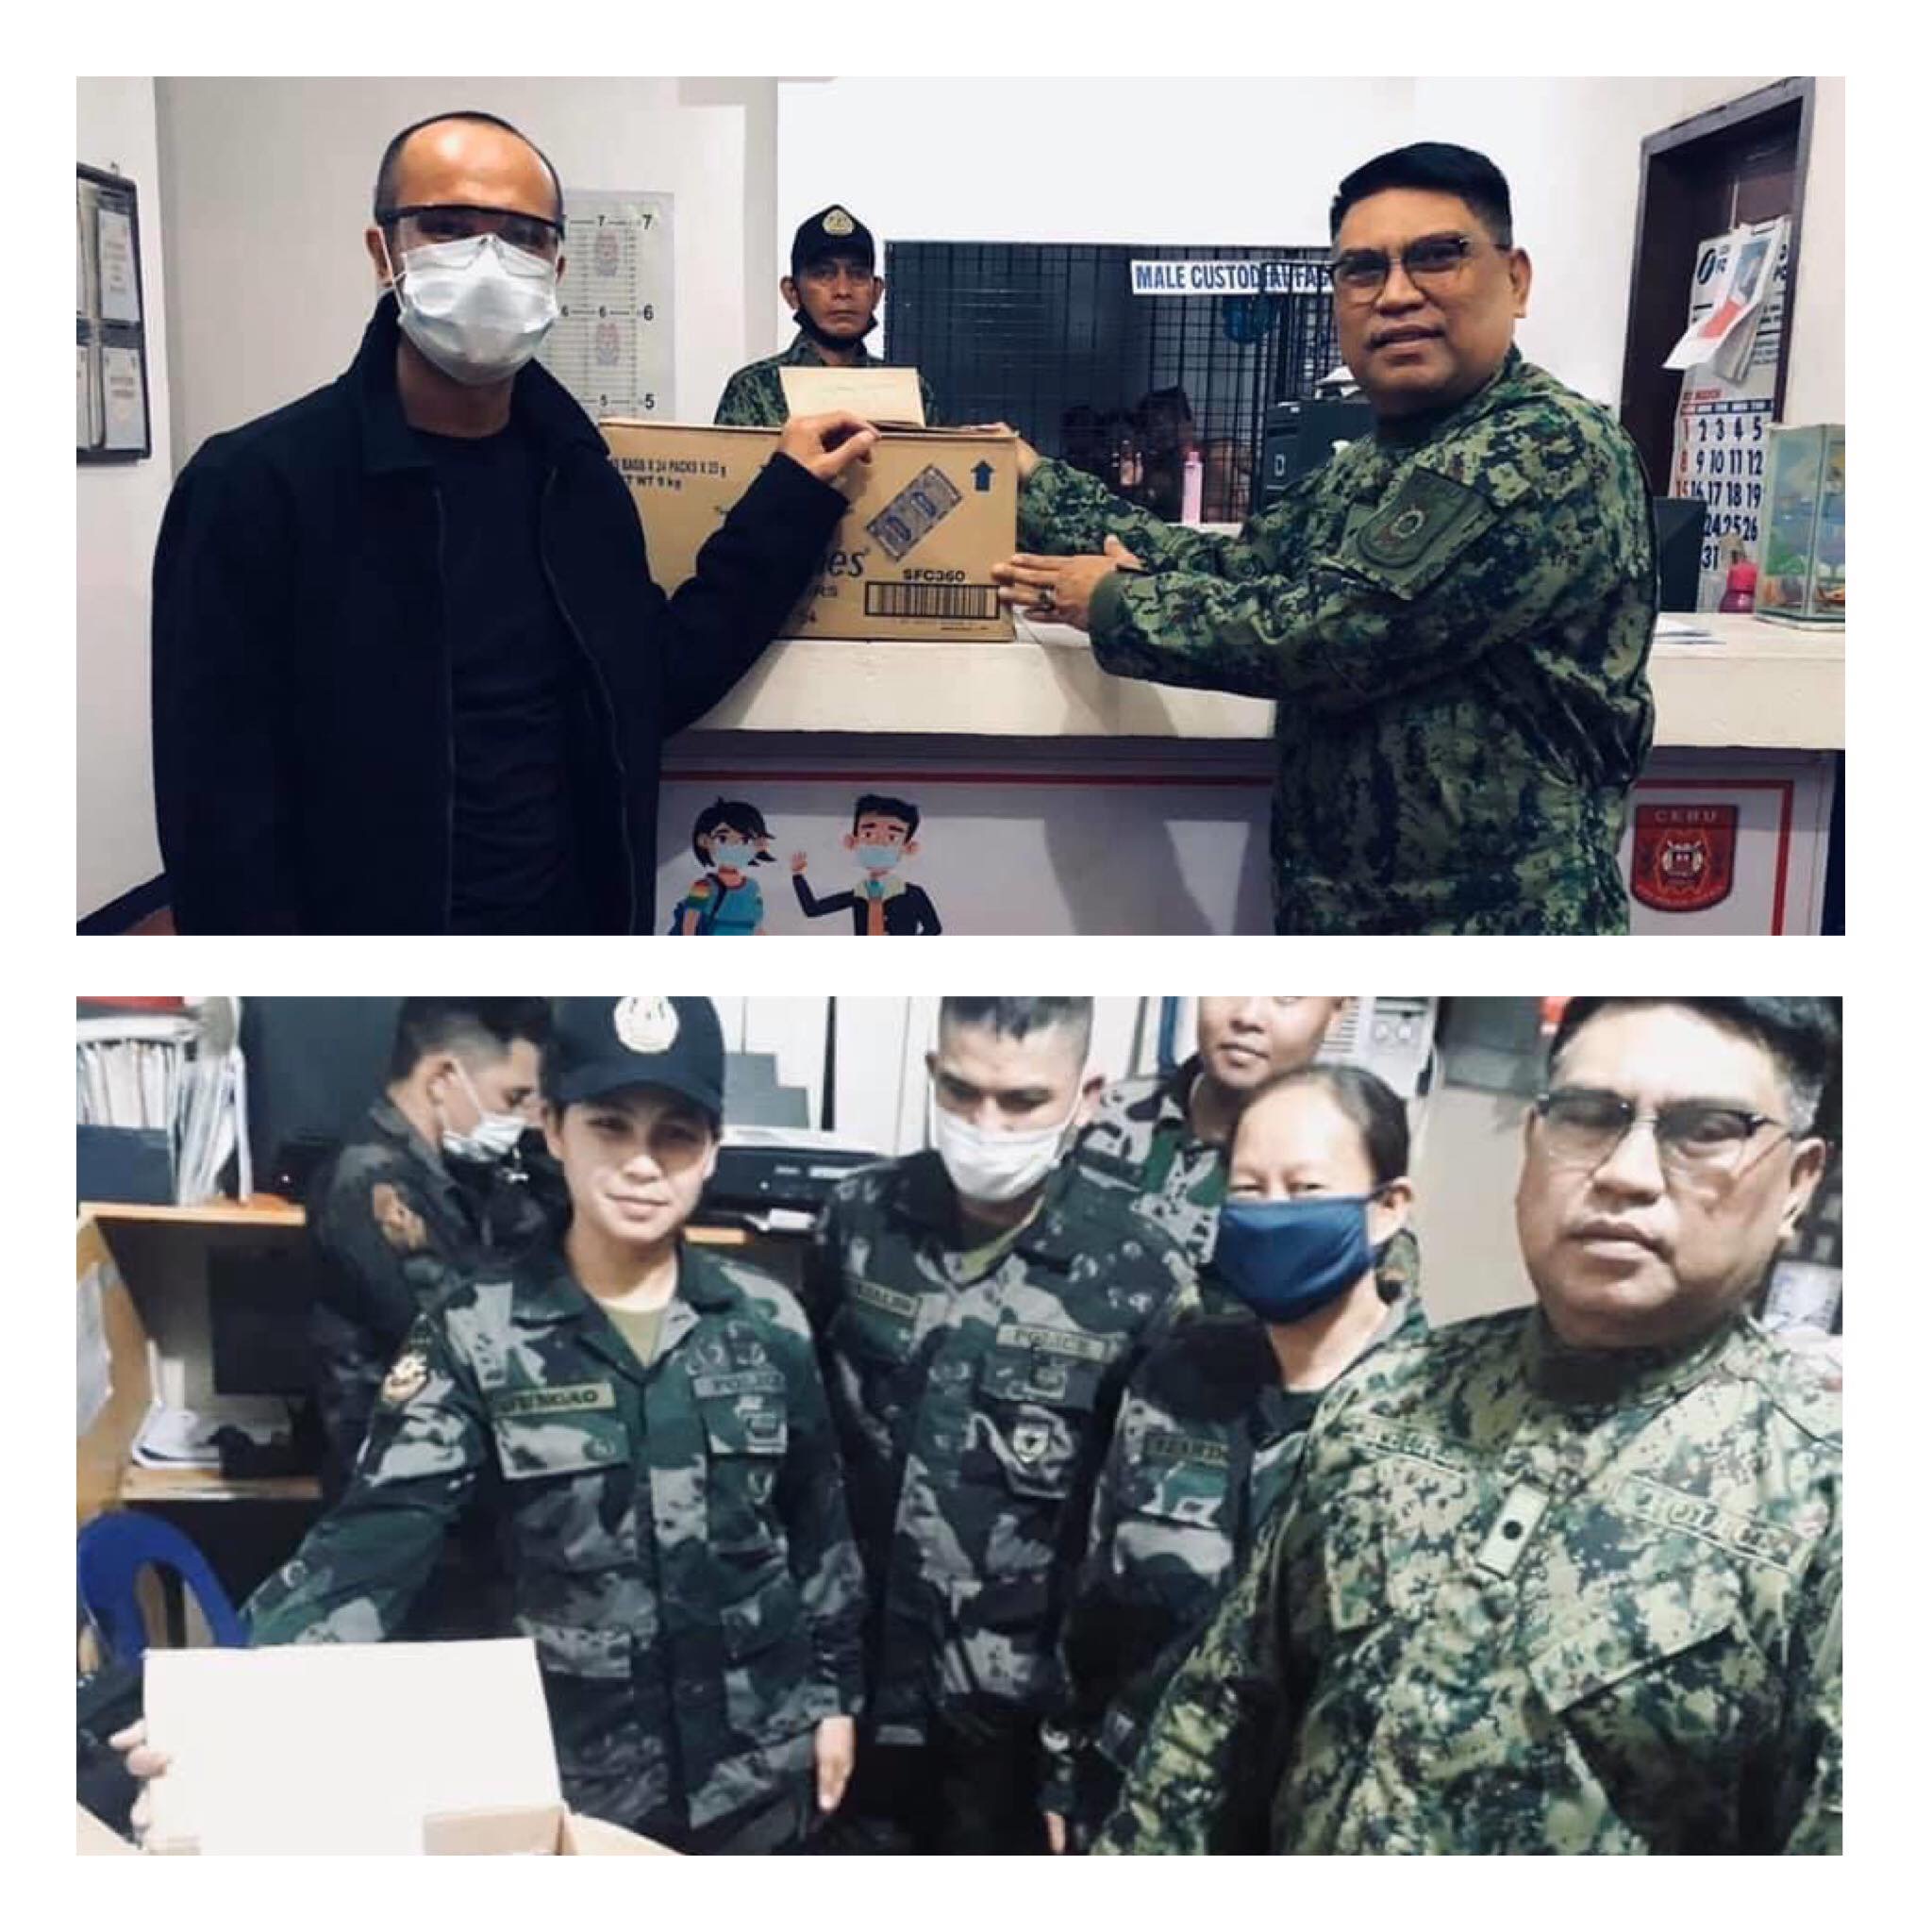 Security force mandated to maintain peace and order in hospitals and quarantined facilities receives food relief packs.